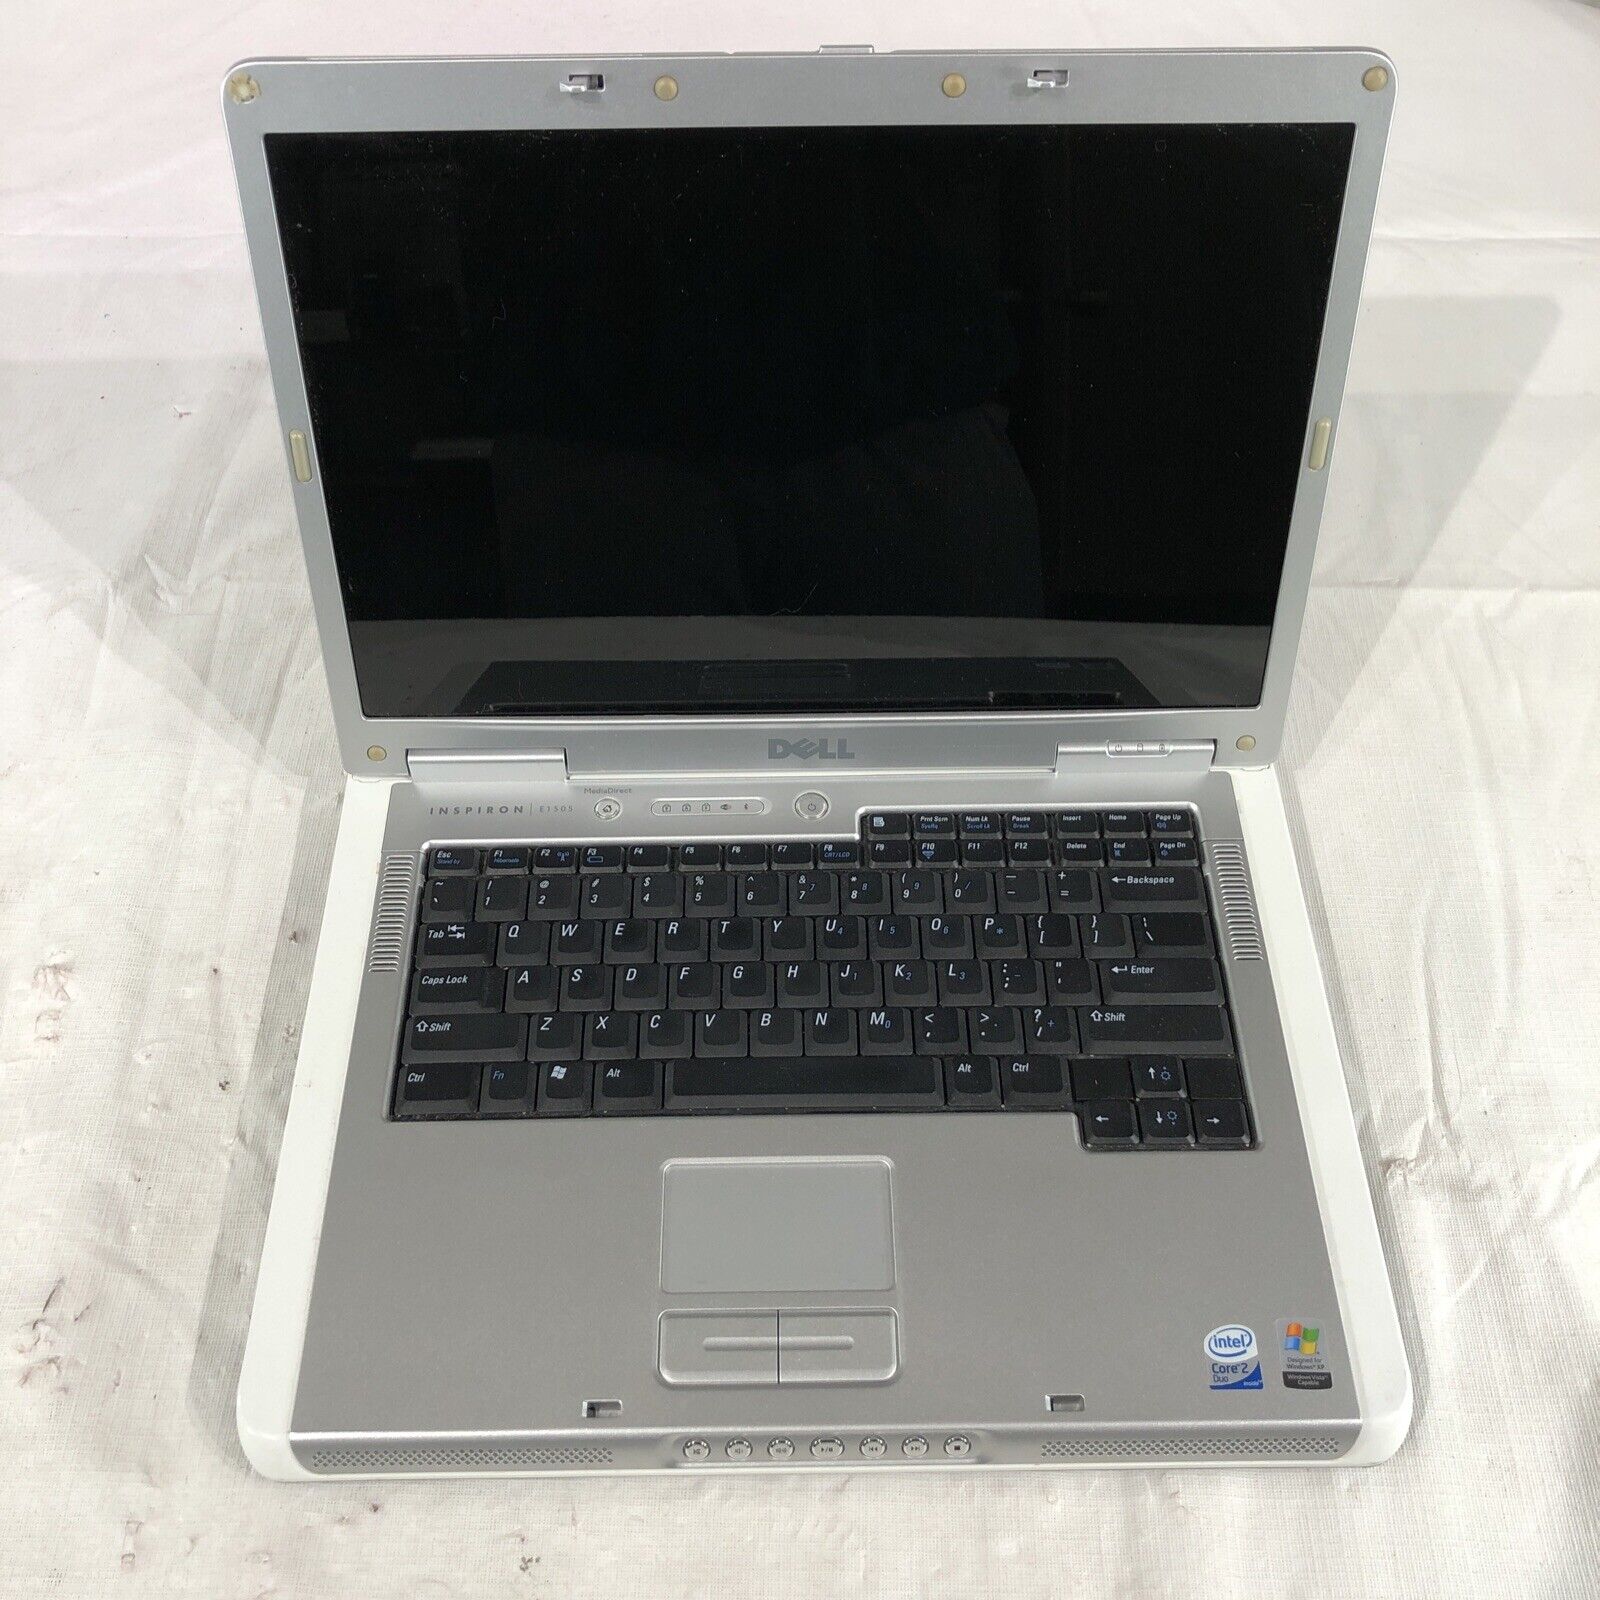 Dell Inspiron E1505Intel Core2Duo 1.66ghz 16gb RAM DDR2 No HDD Or OS